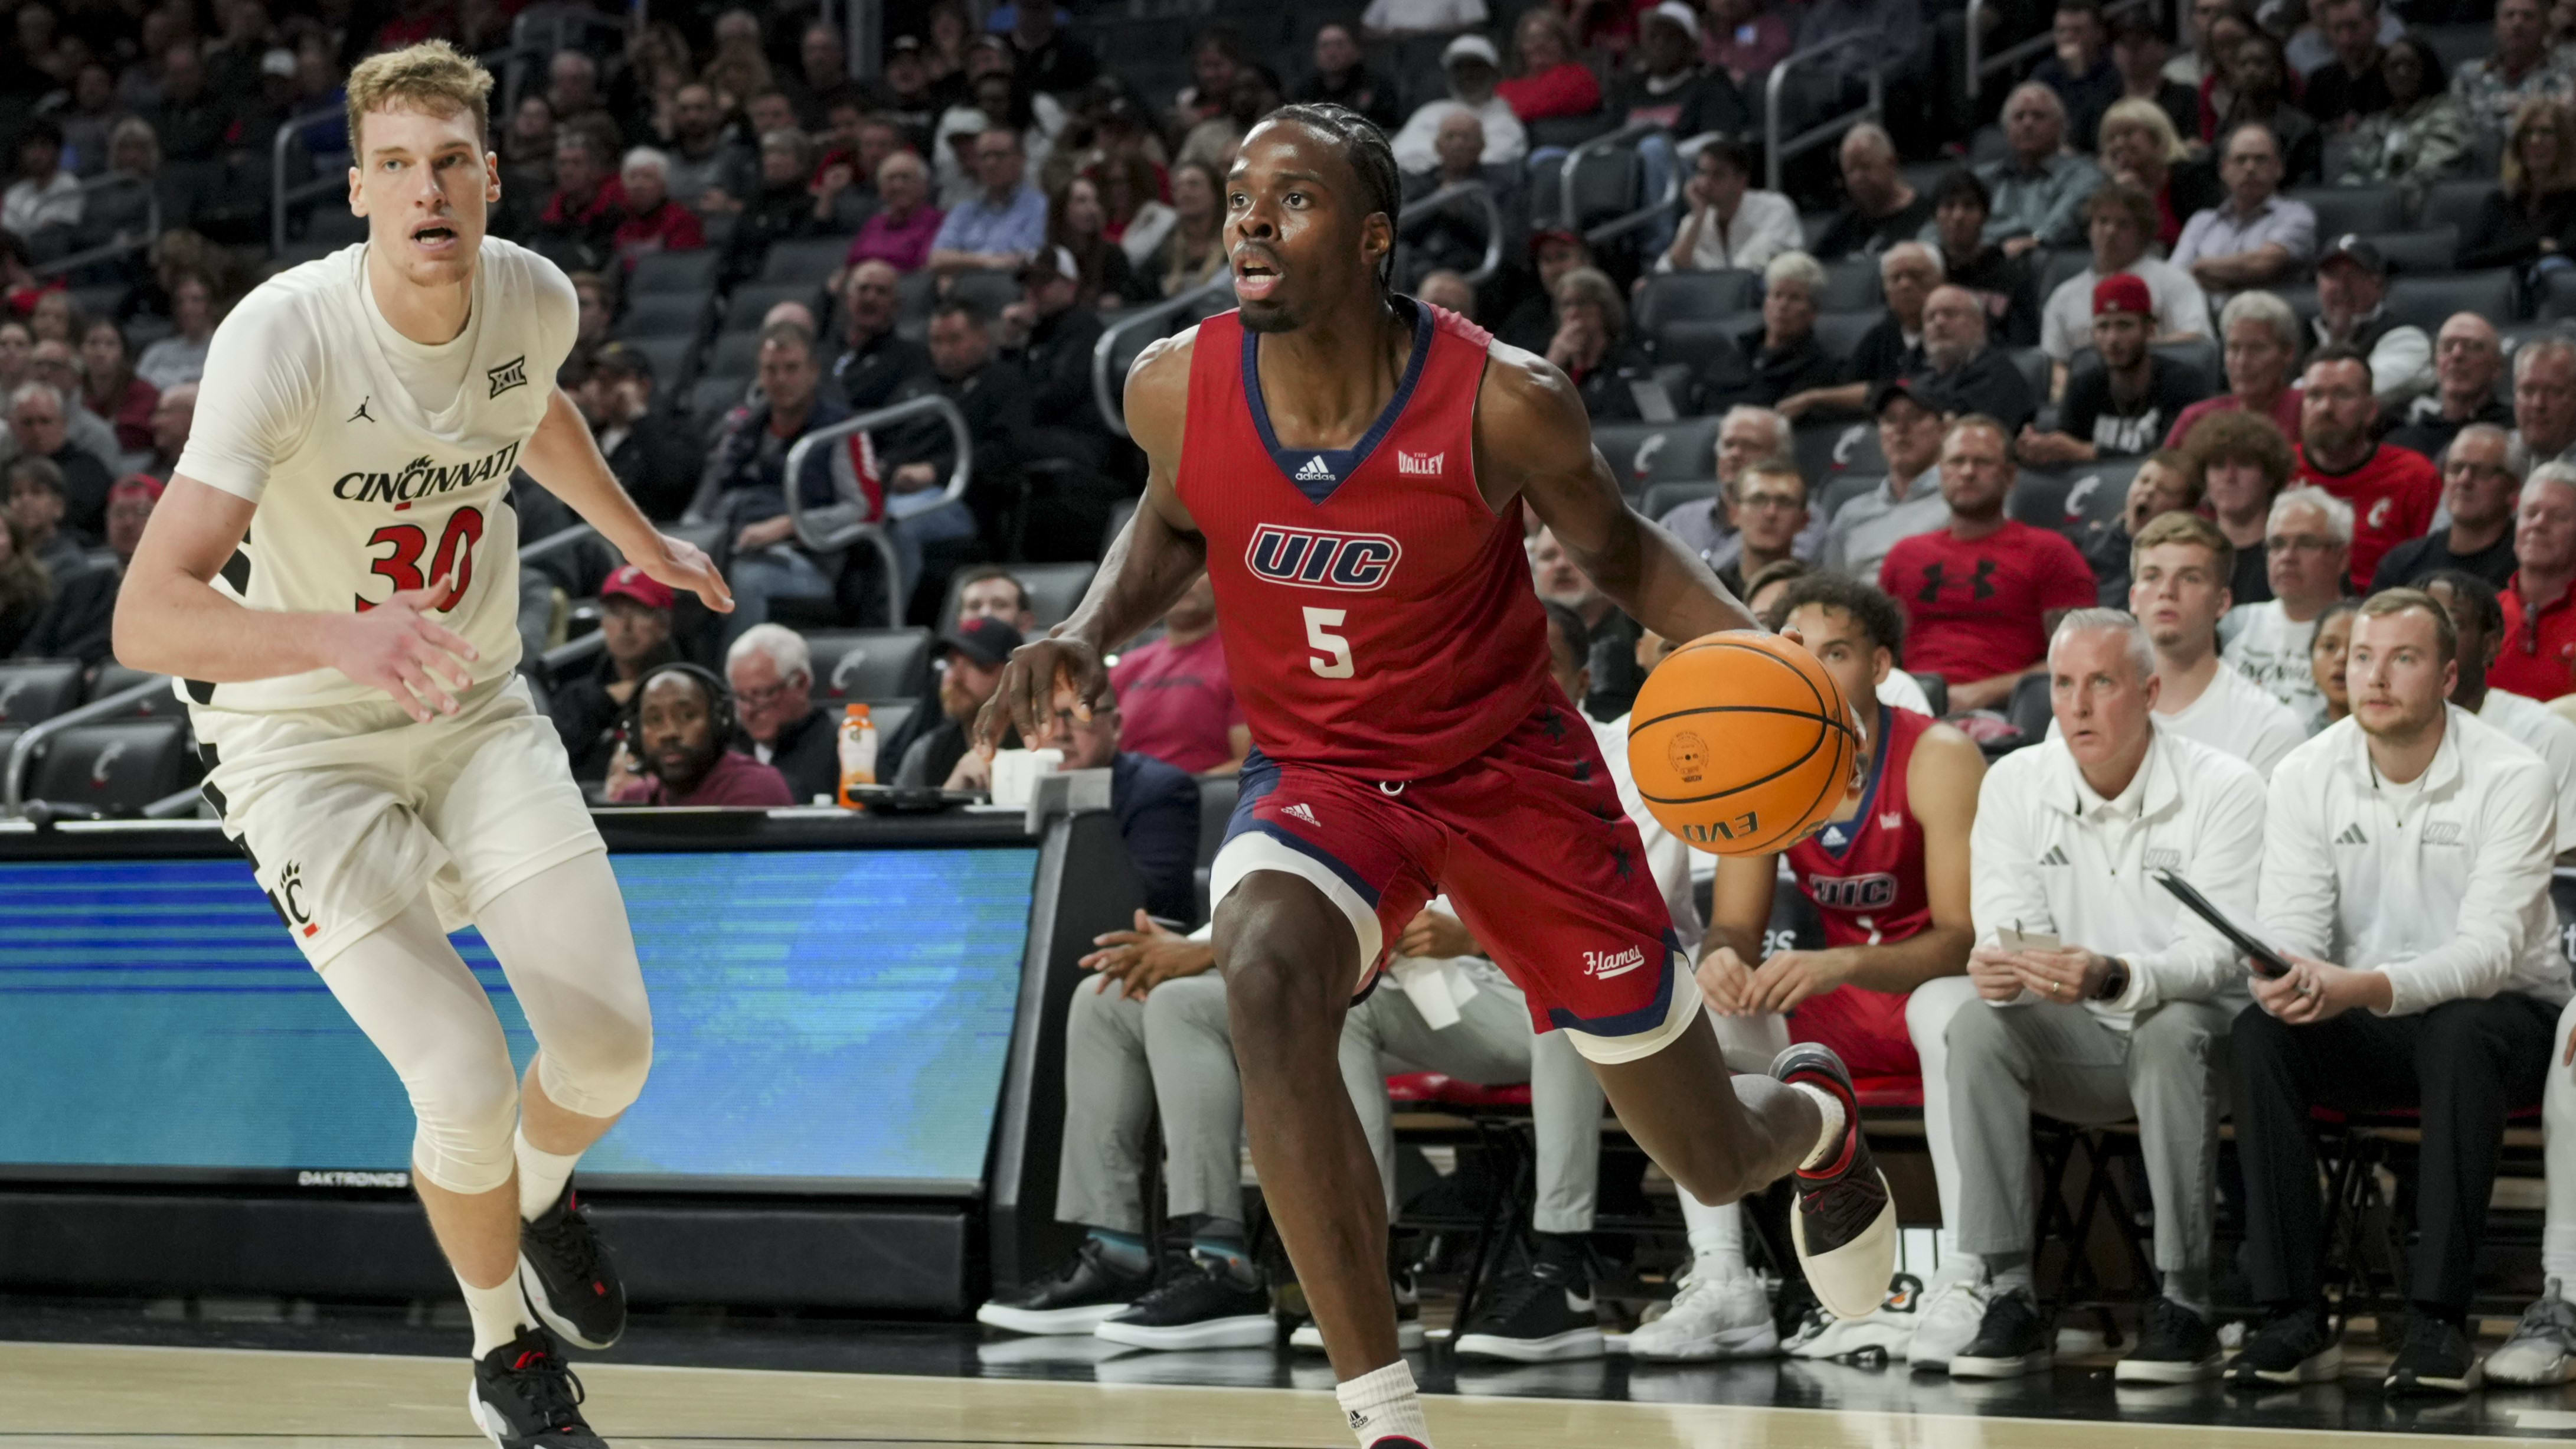 UVA Recruits UIC Transfer Toby Okani: Defensive Standout with Impressive Stats